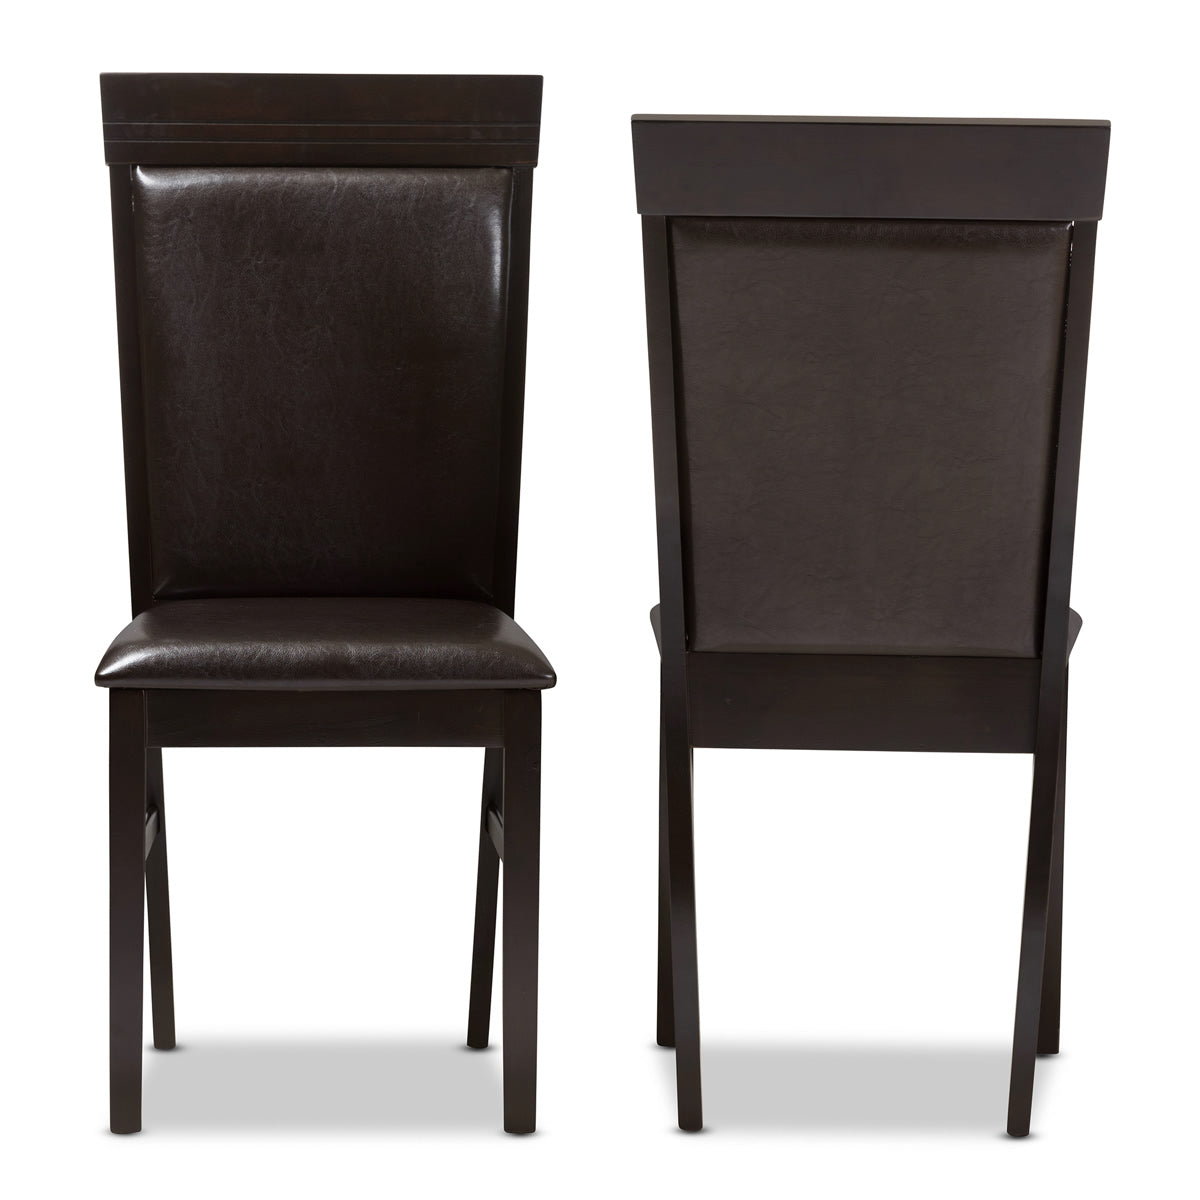 Baxton Studio Thea Modern and Contemporary Dark Brown Faux Leather Upholstered Dining Chair (Set of 2) Baxton Studio-dining chair-Minimal And Modern - 2